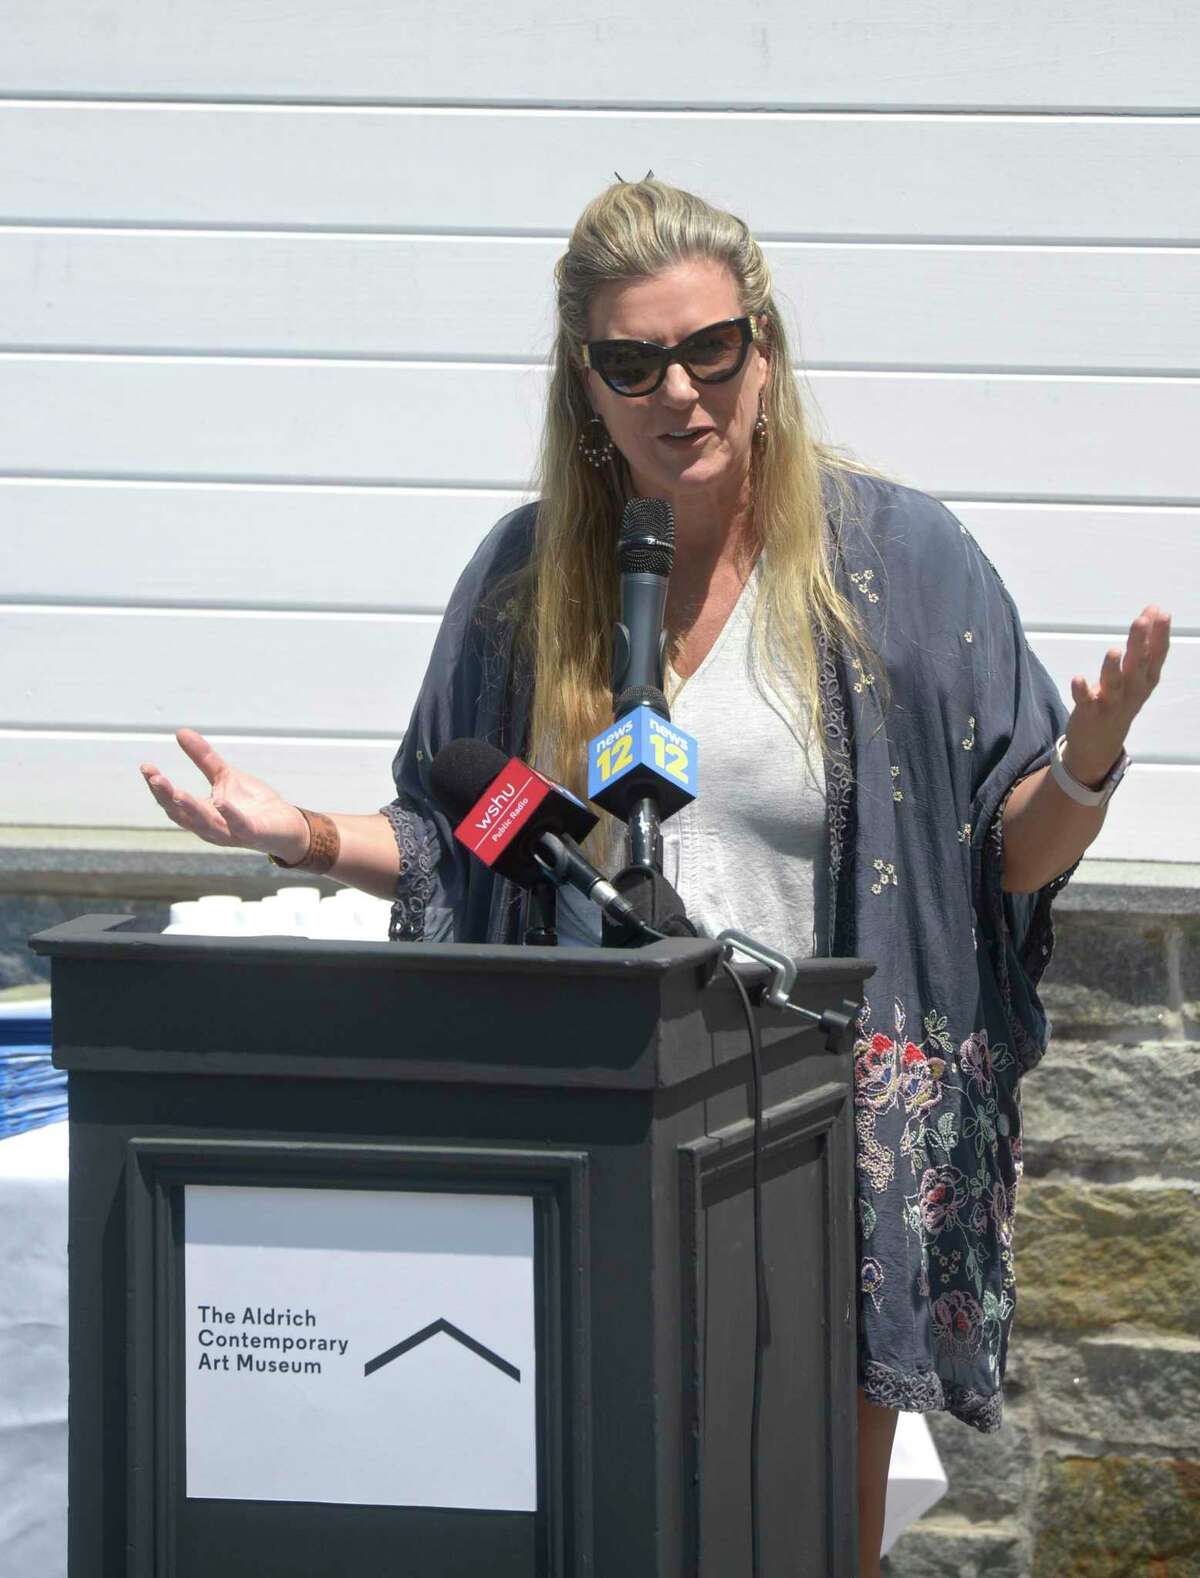 Ridgefield Playhouse Executive Director Allison Stockel speaks at The Aldrich Contemporary Art Museum in Ridgefield. Gov. Ned Lamont was there to recognize the town’s approval for the state’s first designated cultural district.